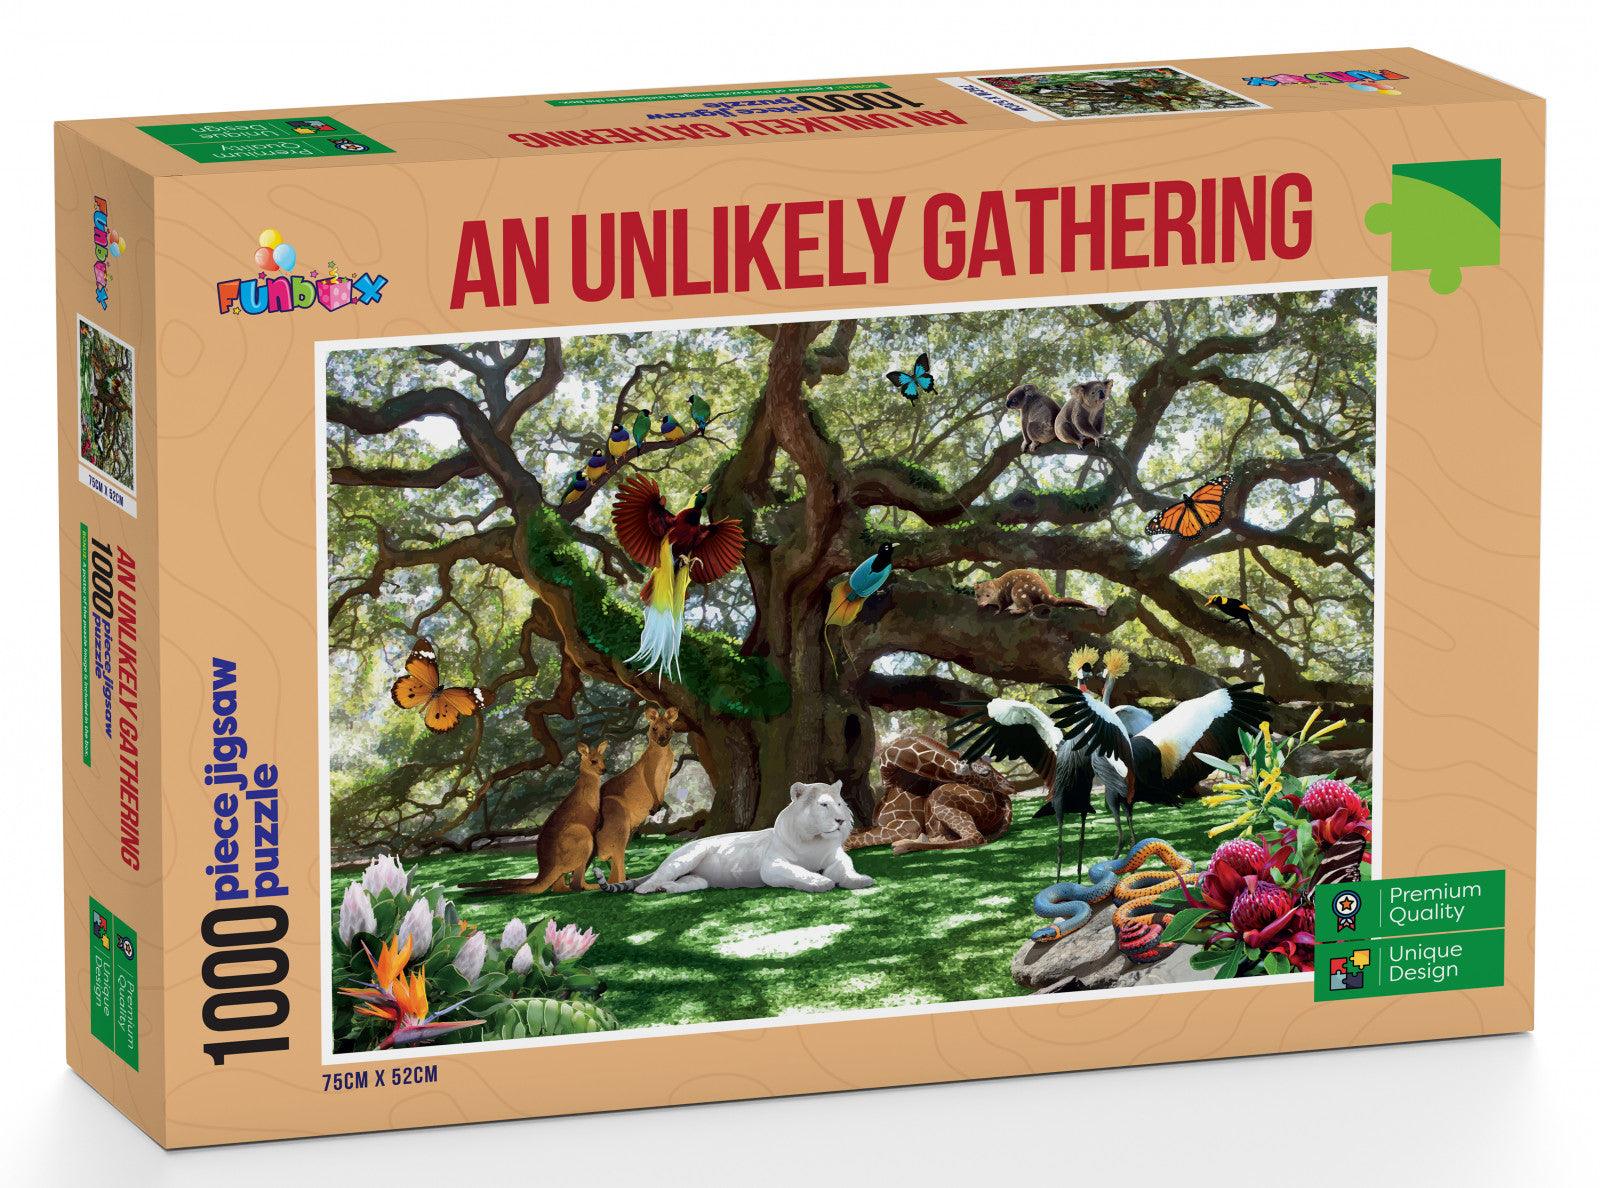 VR-84503 Funbox Puzzle An Unlikely Gathering Puzzle 1,000 pieces - Funbox - Titan Pop Culture